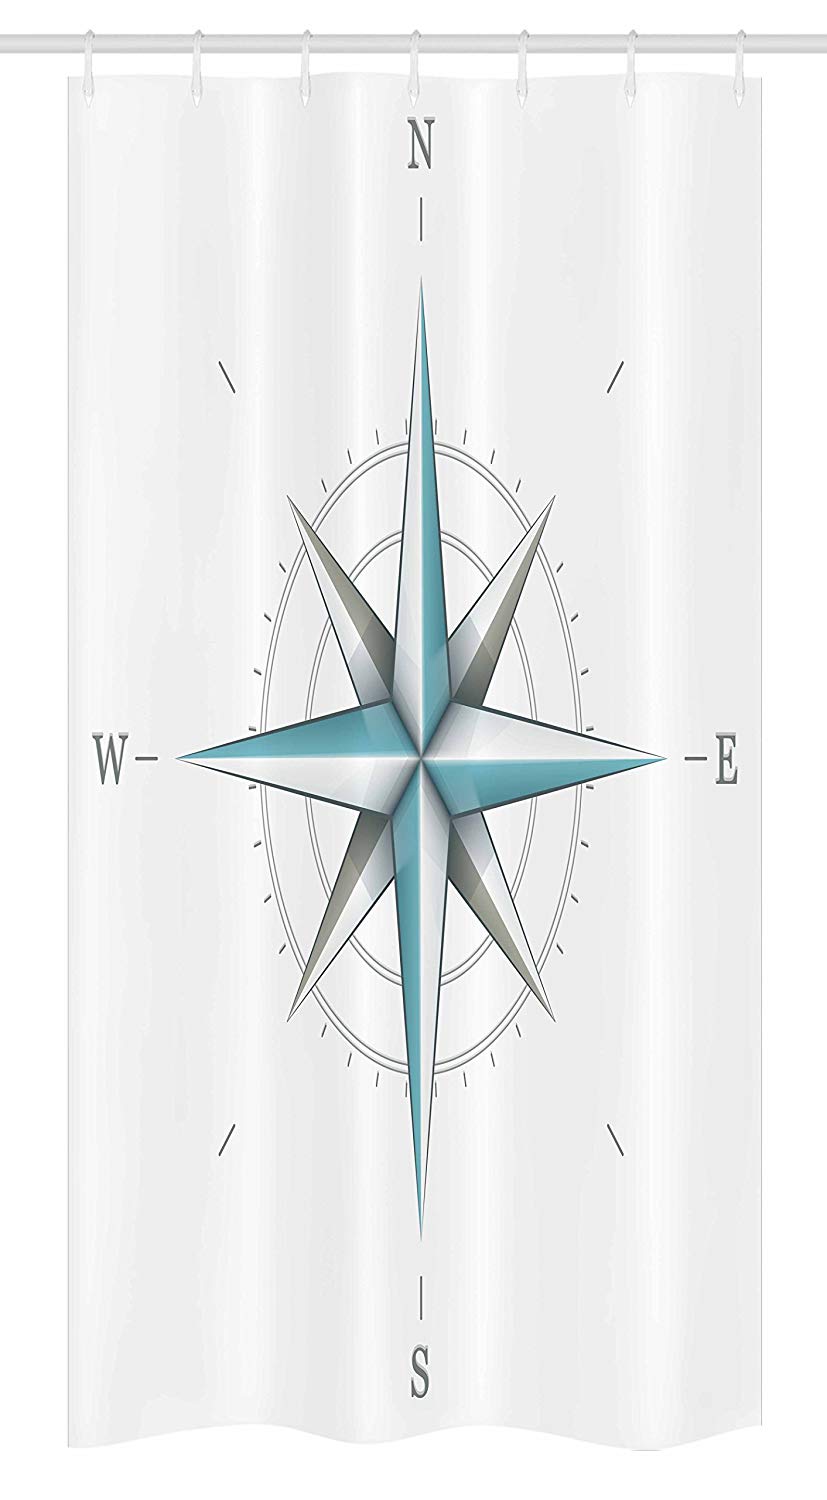 Ambesonne Compass Stall Shower Curtain, Antique Wind Rose Diagram for Cardinal Directions Axis of Earth Illustration, Fabric Bathroom Decor Set with Hooks, 36" X 72", Teal Dimgray